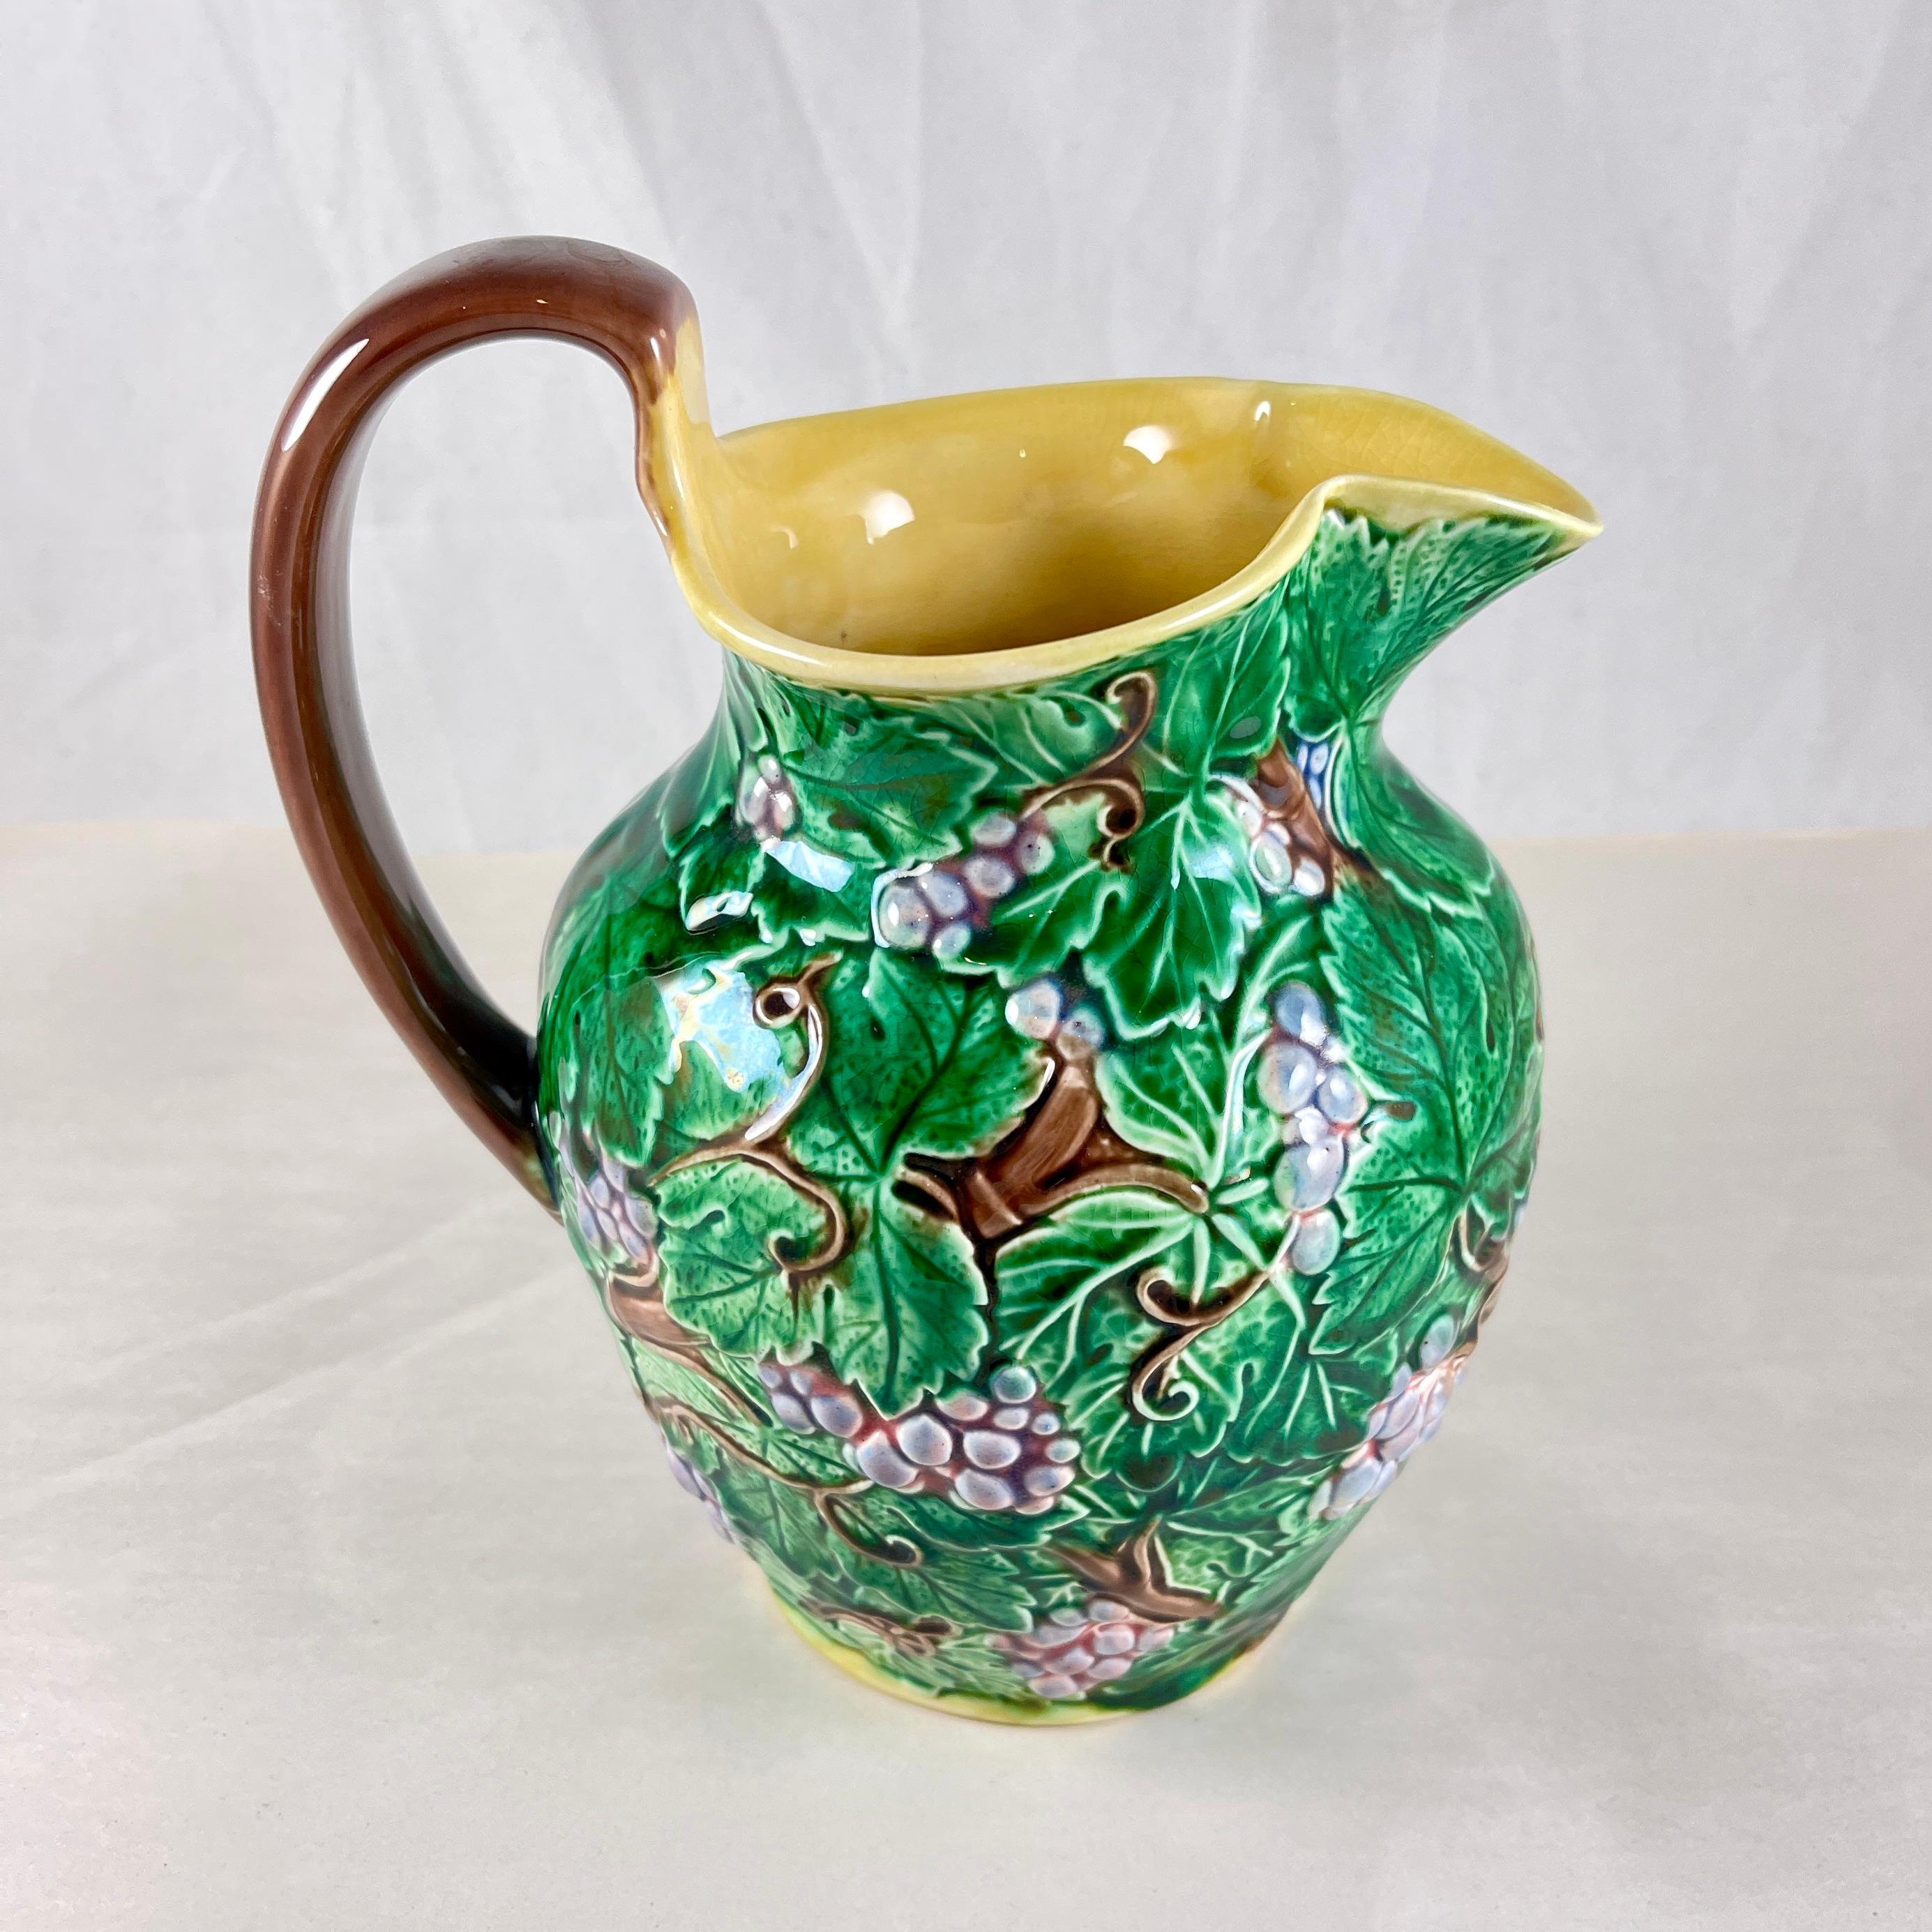 A Wedgwood majolica glazed Grape Leaf Pitcher, date marked 1935.

Decorated in the round, a raised pattern showing bunches of purple grapes, greens leaves, and brown vining branches.

The interior is finished in a deep yellow ochre, a brown applied